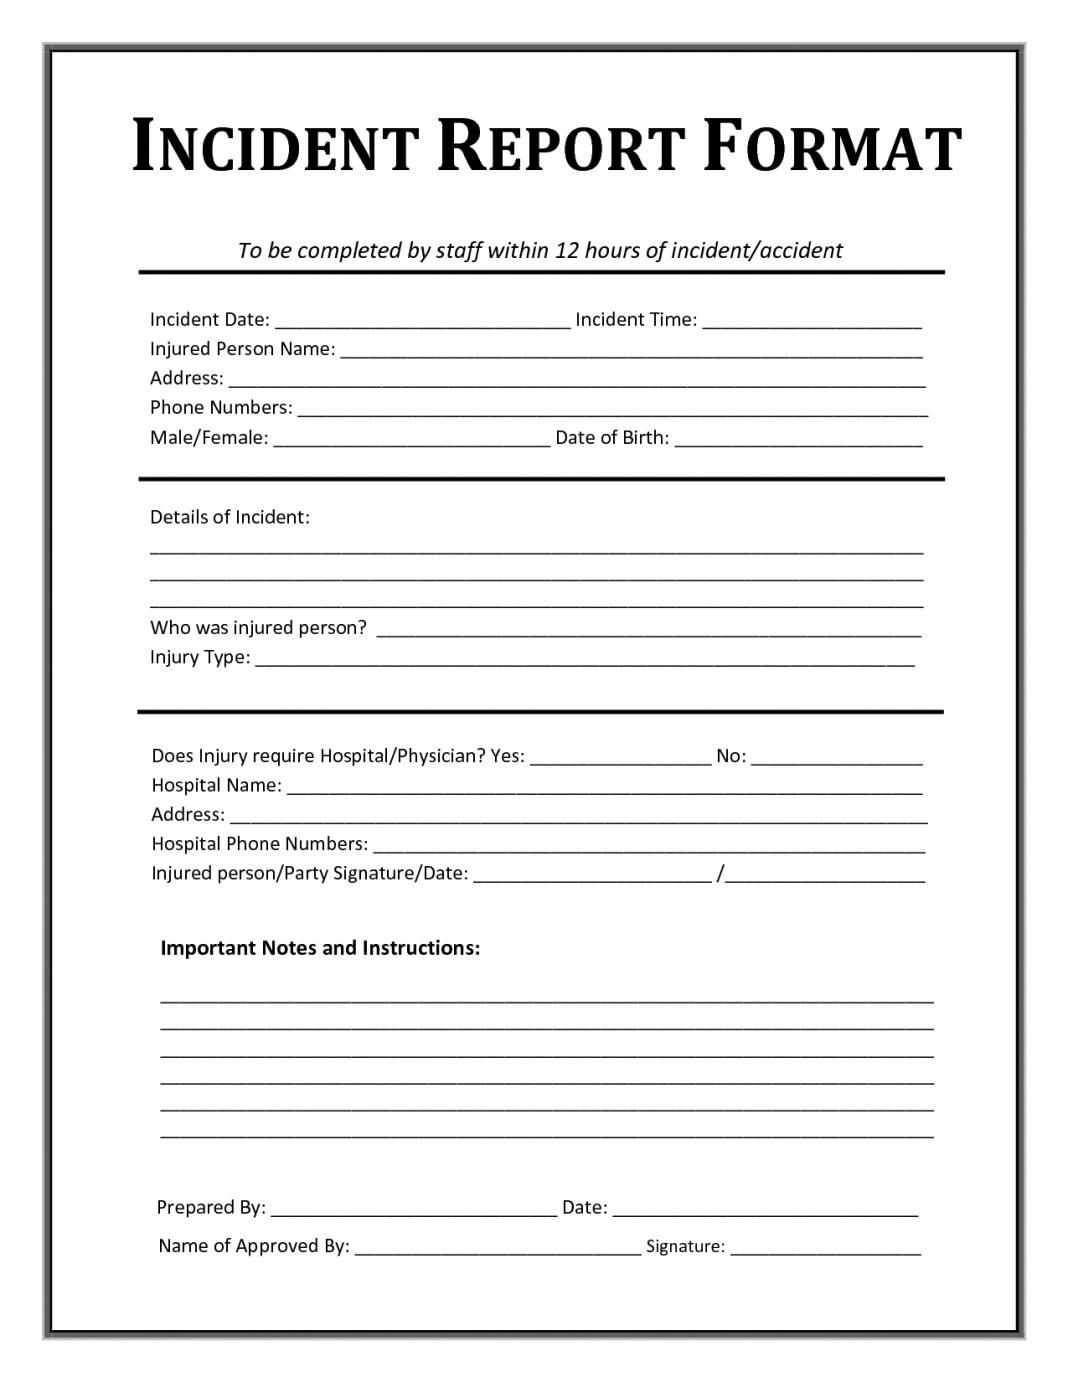 Incident Report Format Template Form Word Uk Document South In Incident Report Template Uk